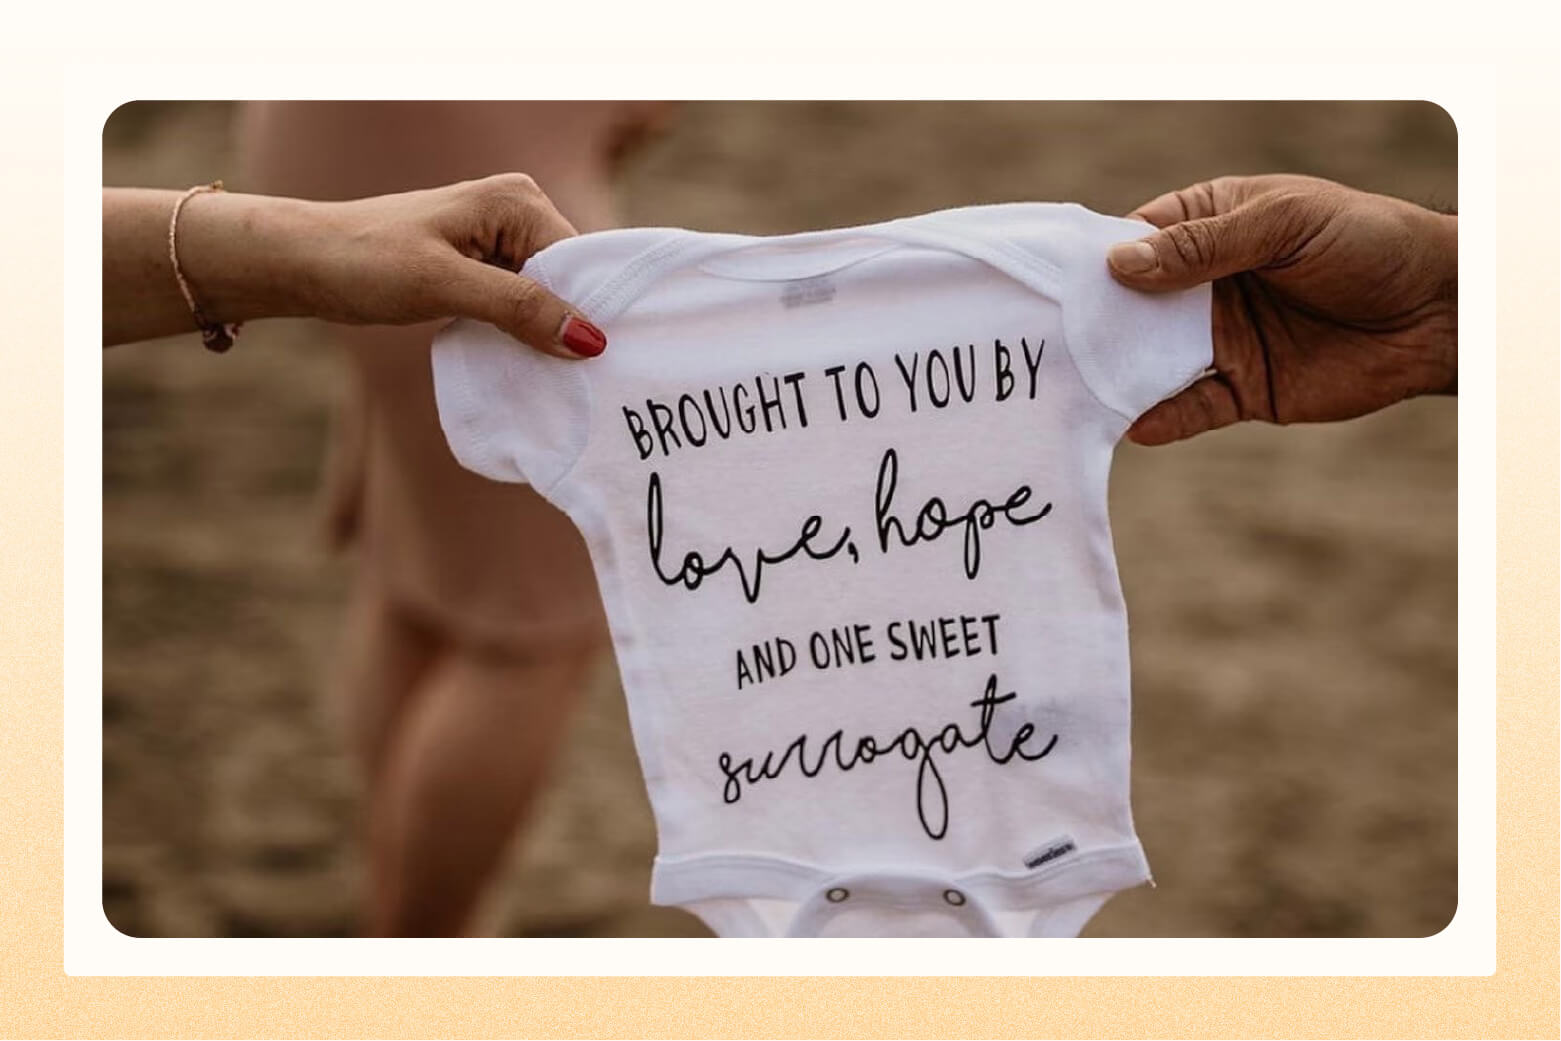 two hands holding up a white onesie that reads "brought to you by love, hope and one sweet surrogate"